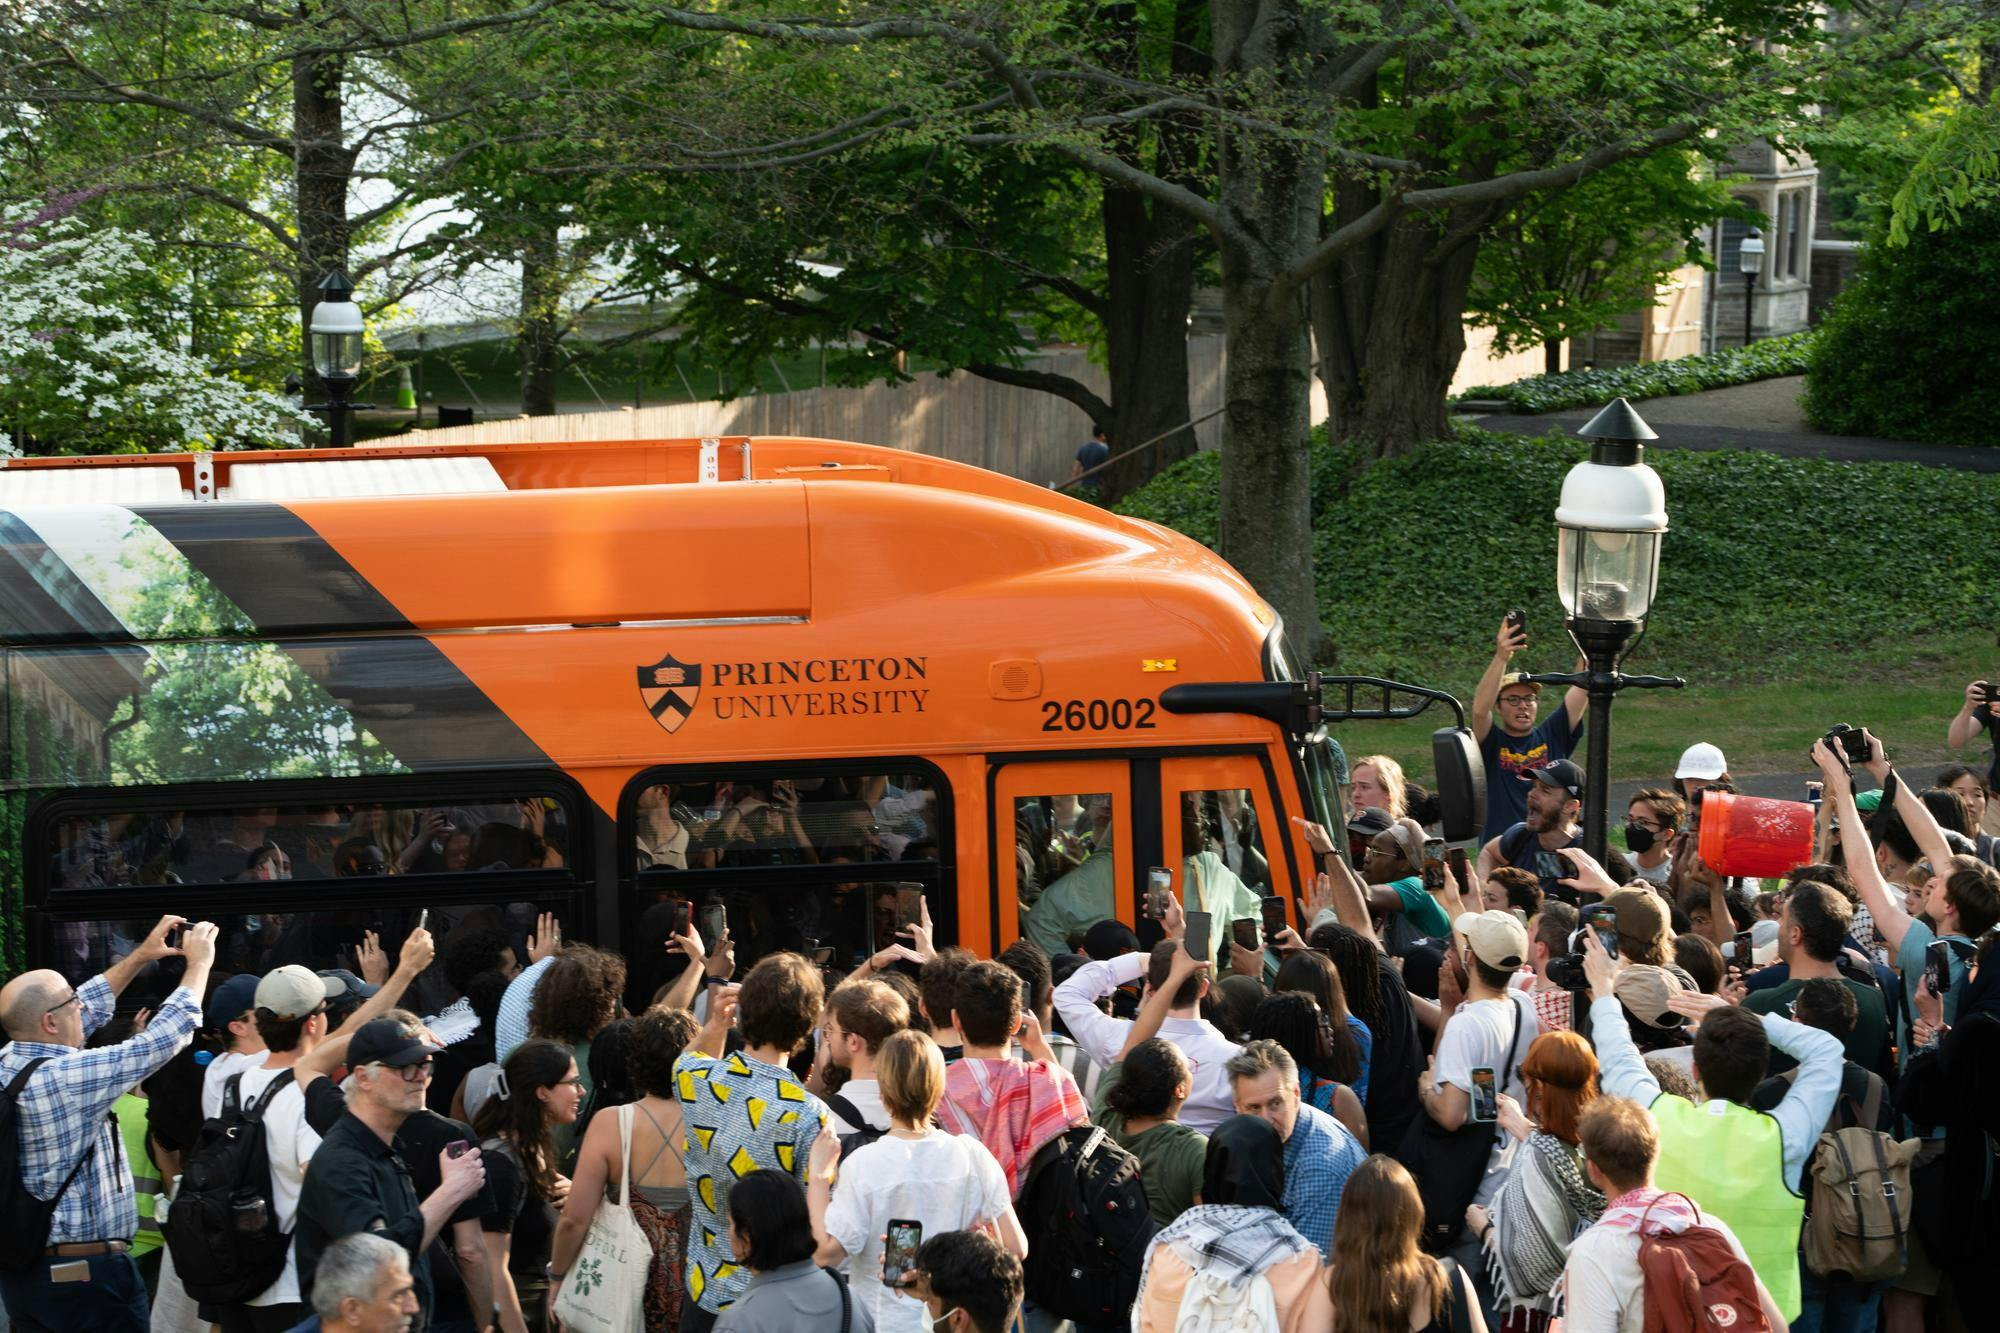 Many people surround a black and orange Princeton bus from the front and side of it.